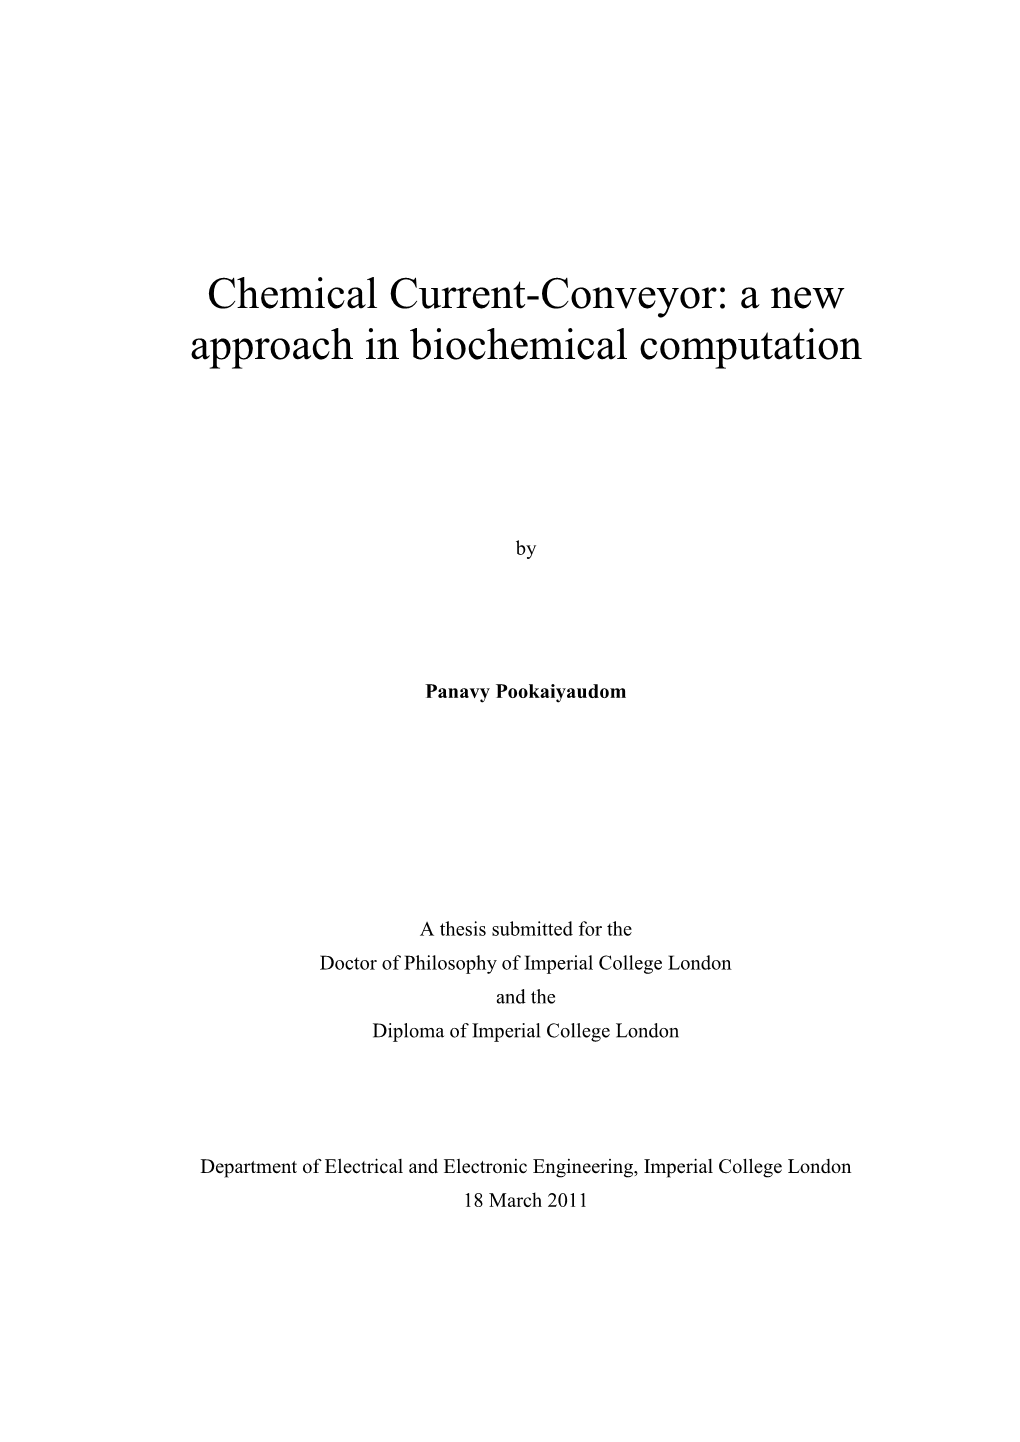 Chemical Current-Conveyor: a New Approach in Biochemical Computation